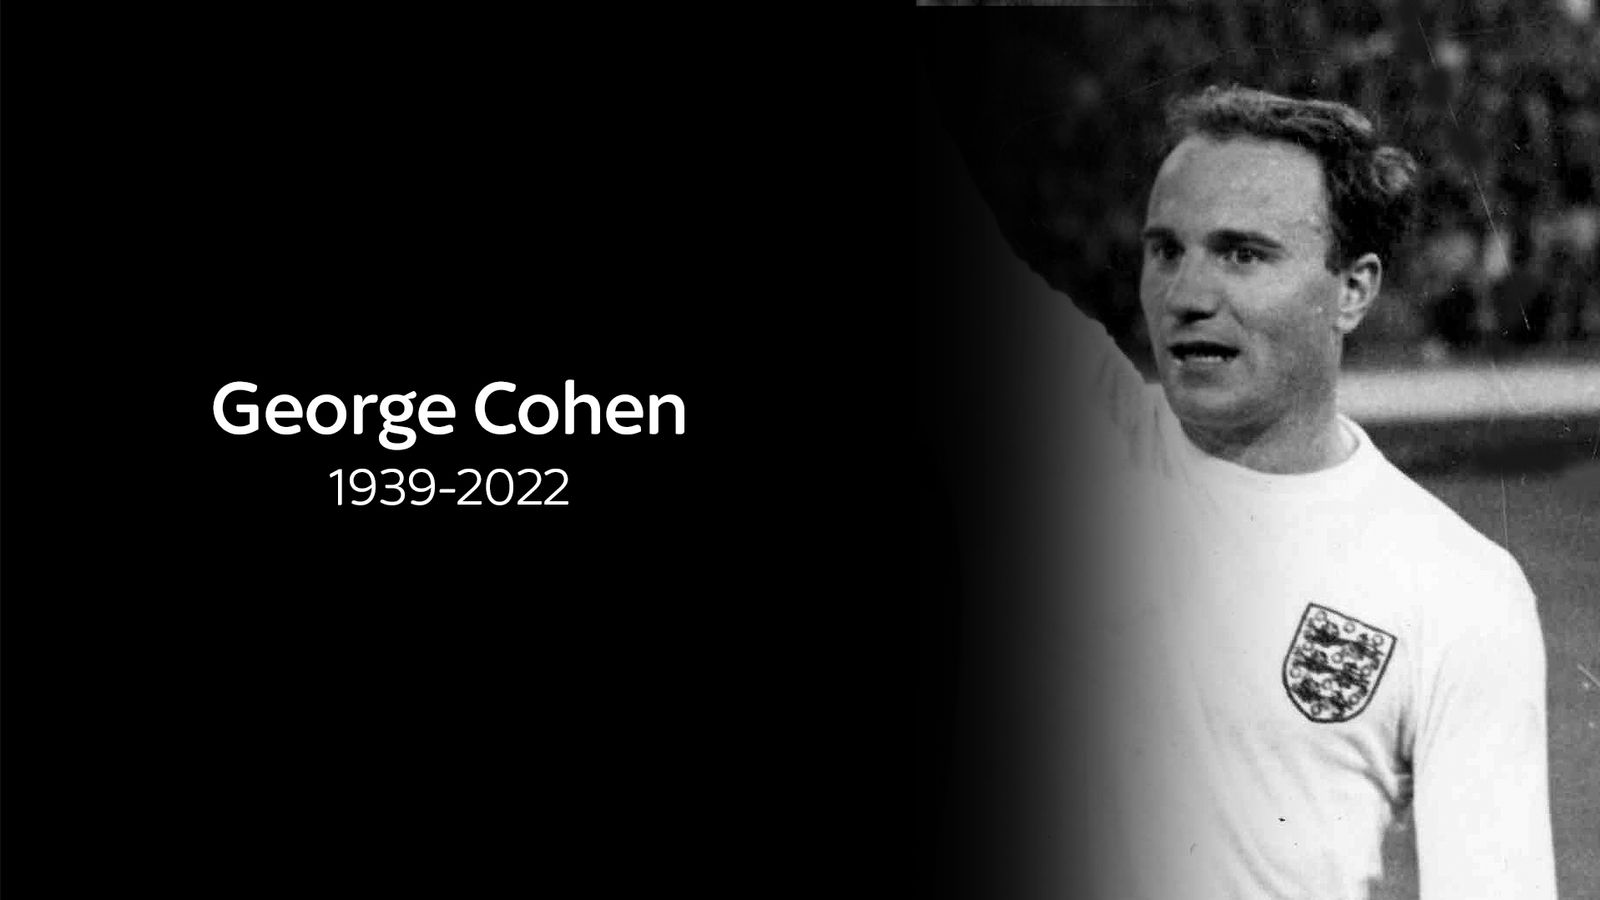 George Cohen: England World Cup winner and Fulham legend dies aged 83